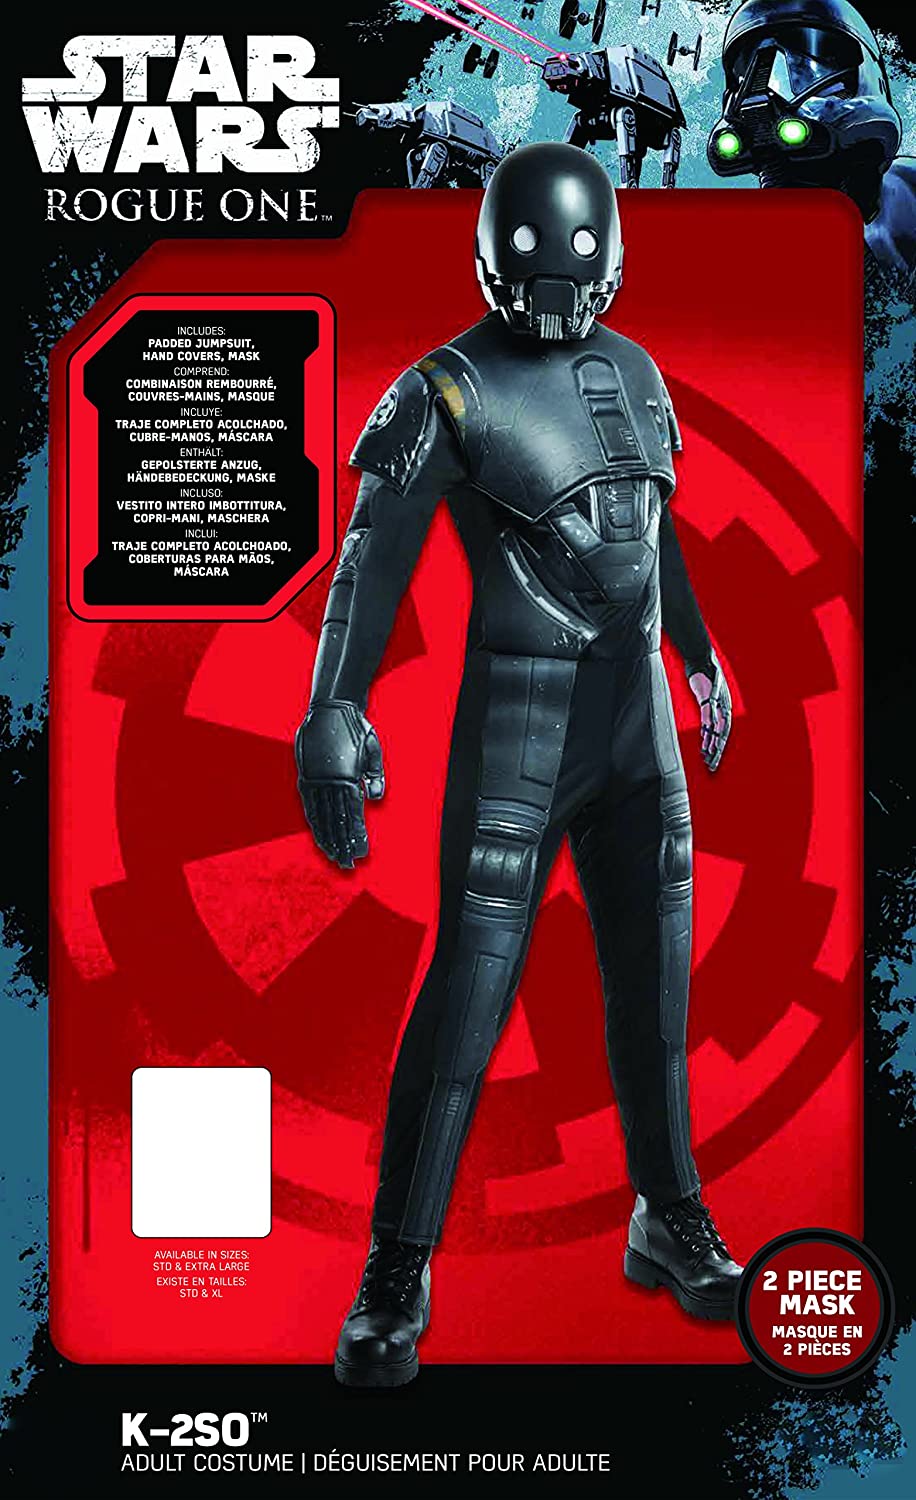 K2S0 Costume Deluxe Adult Rogue One Star Wars_3